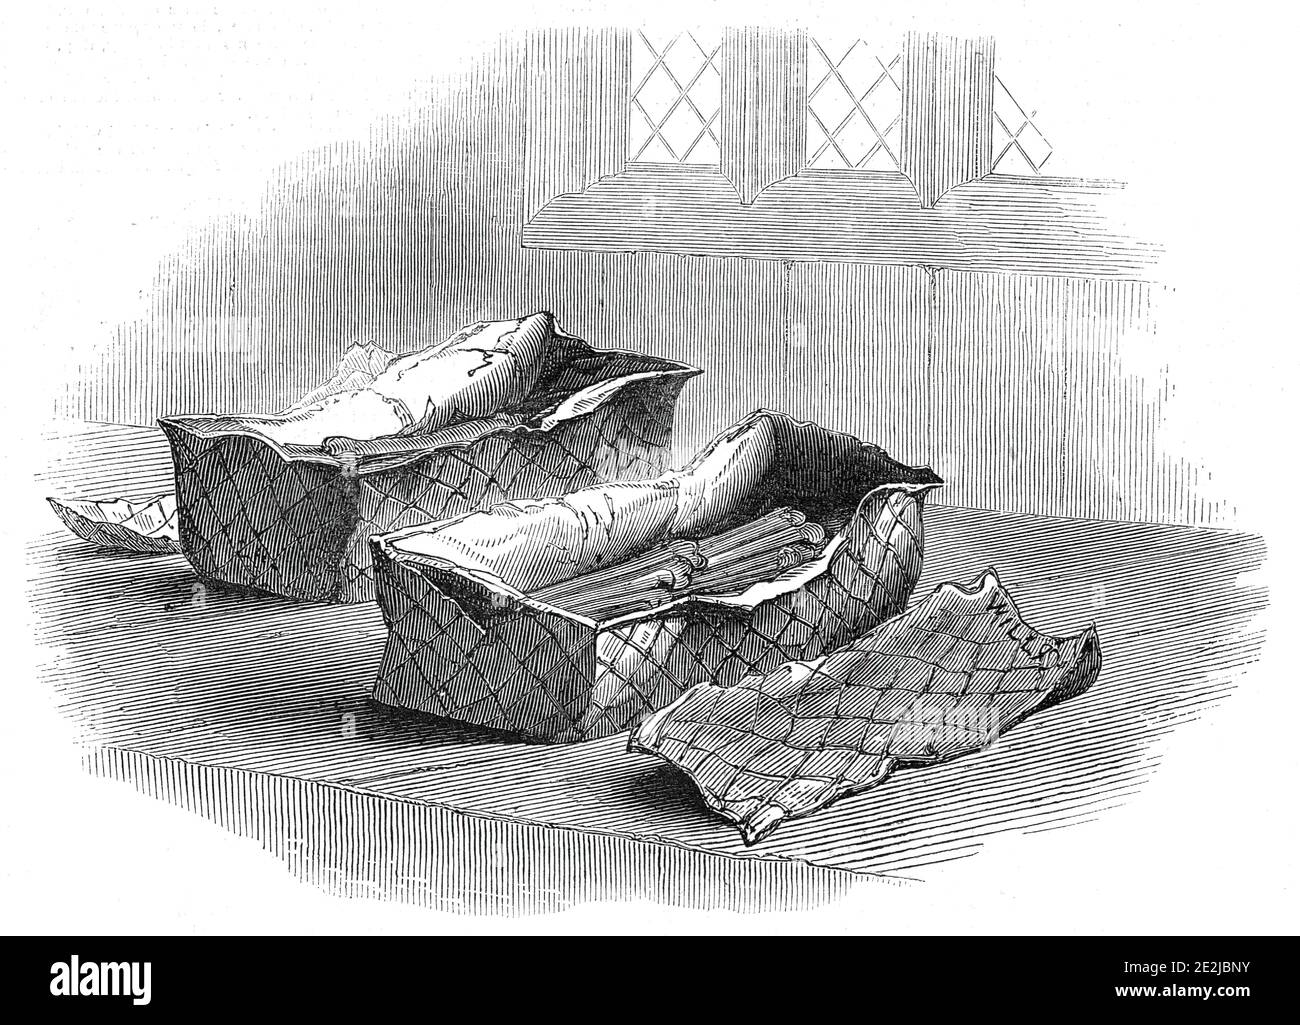 The cists in Southover Church, 1845. 11th-century human remains found in the ruins of the 'ancient Priory of Lewes' in Sussex, during the construction of a railway line. '...the workmen exposed a leaden Cist, or coffer, surrounded by a few square Caen stones. After clearing away the soil, the Cist was carefully removed, and, on being opened, was found to contain human bones, proved to be the remains of Gundreda, daughter of William the Conqueror, the name &quot;GVNDRADA,&quot; as it is spelt, being cut upon the lid....'. A second cist was found, '...and on the lid is inscribed WILLMs, an old b Stock Photo